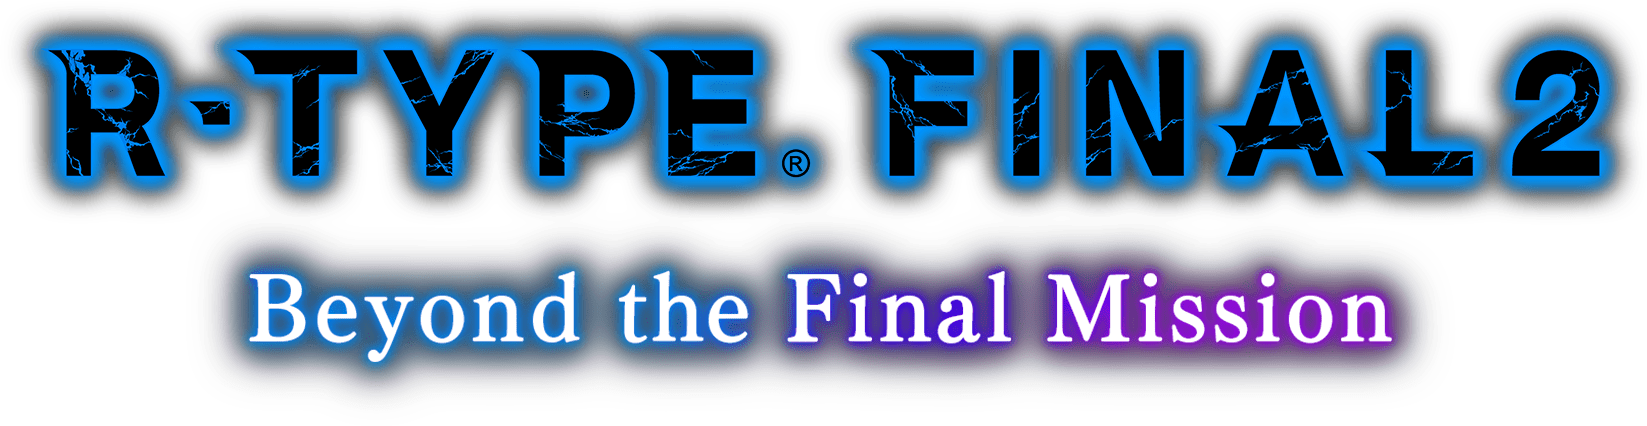 R-TYPE®FINAL 2 Beyond the Final Mission